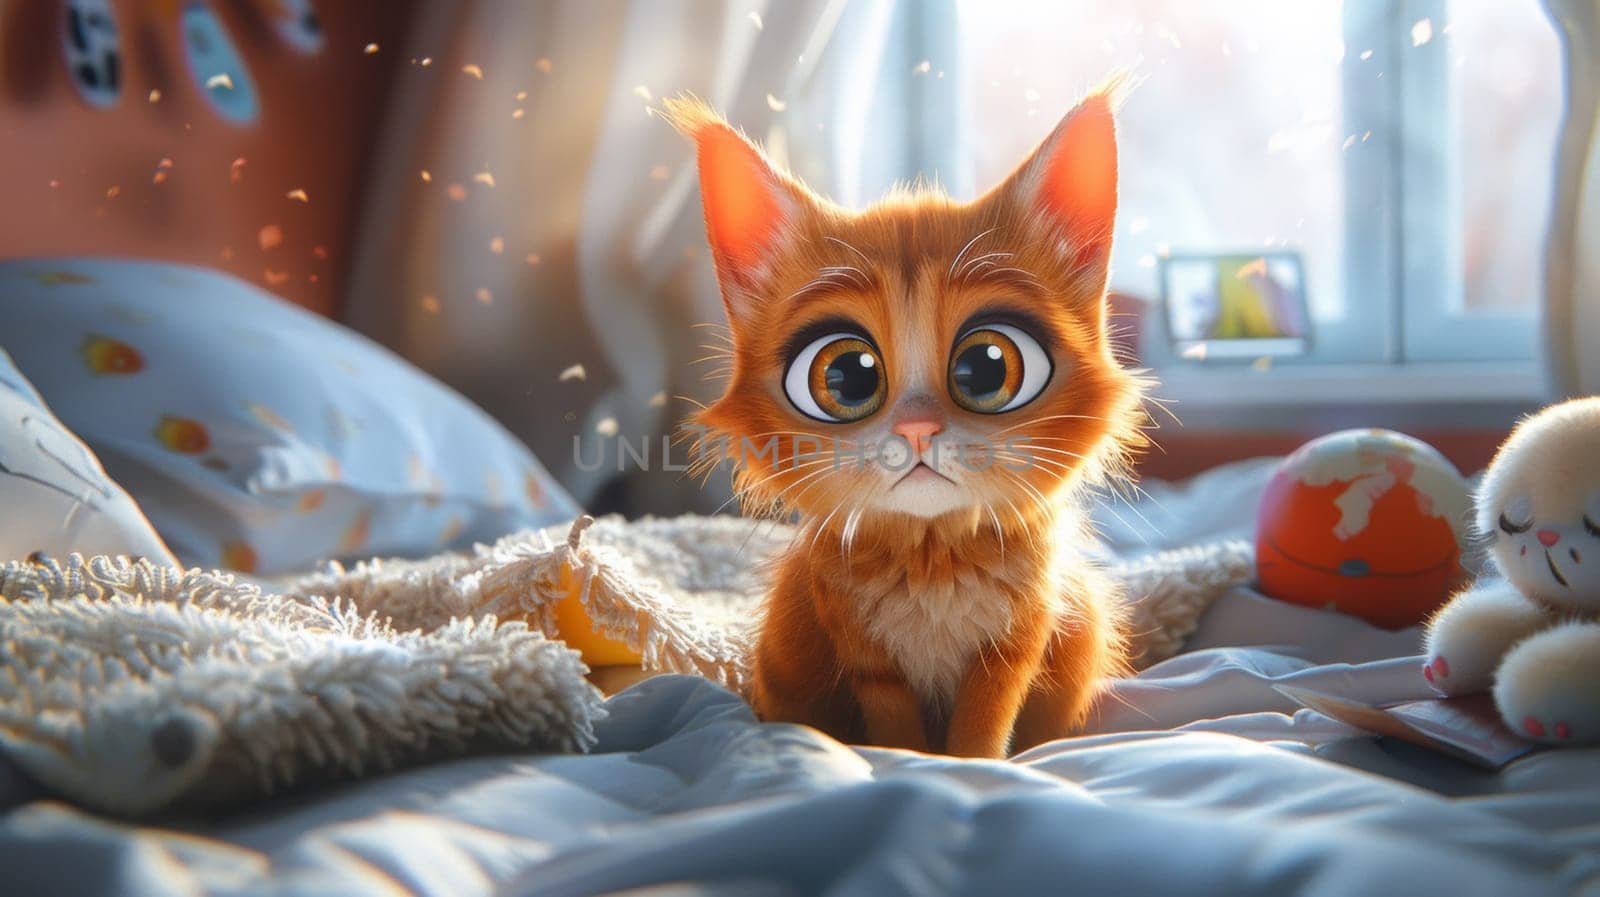 A small orange cat sitting on a bed with stuffed animals, AI by starush